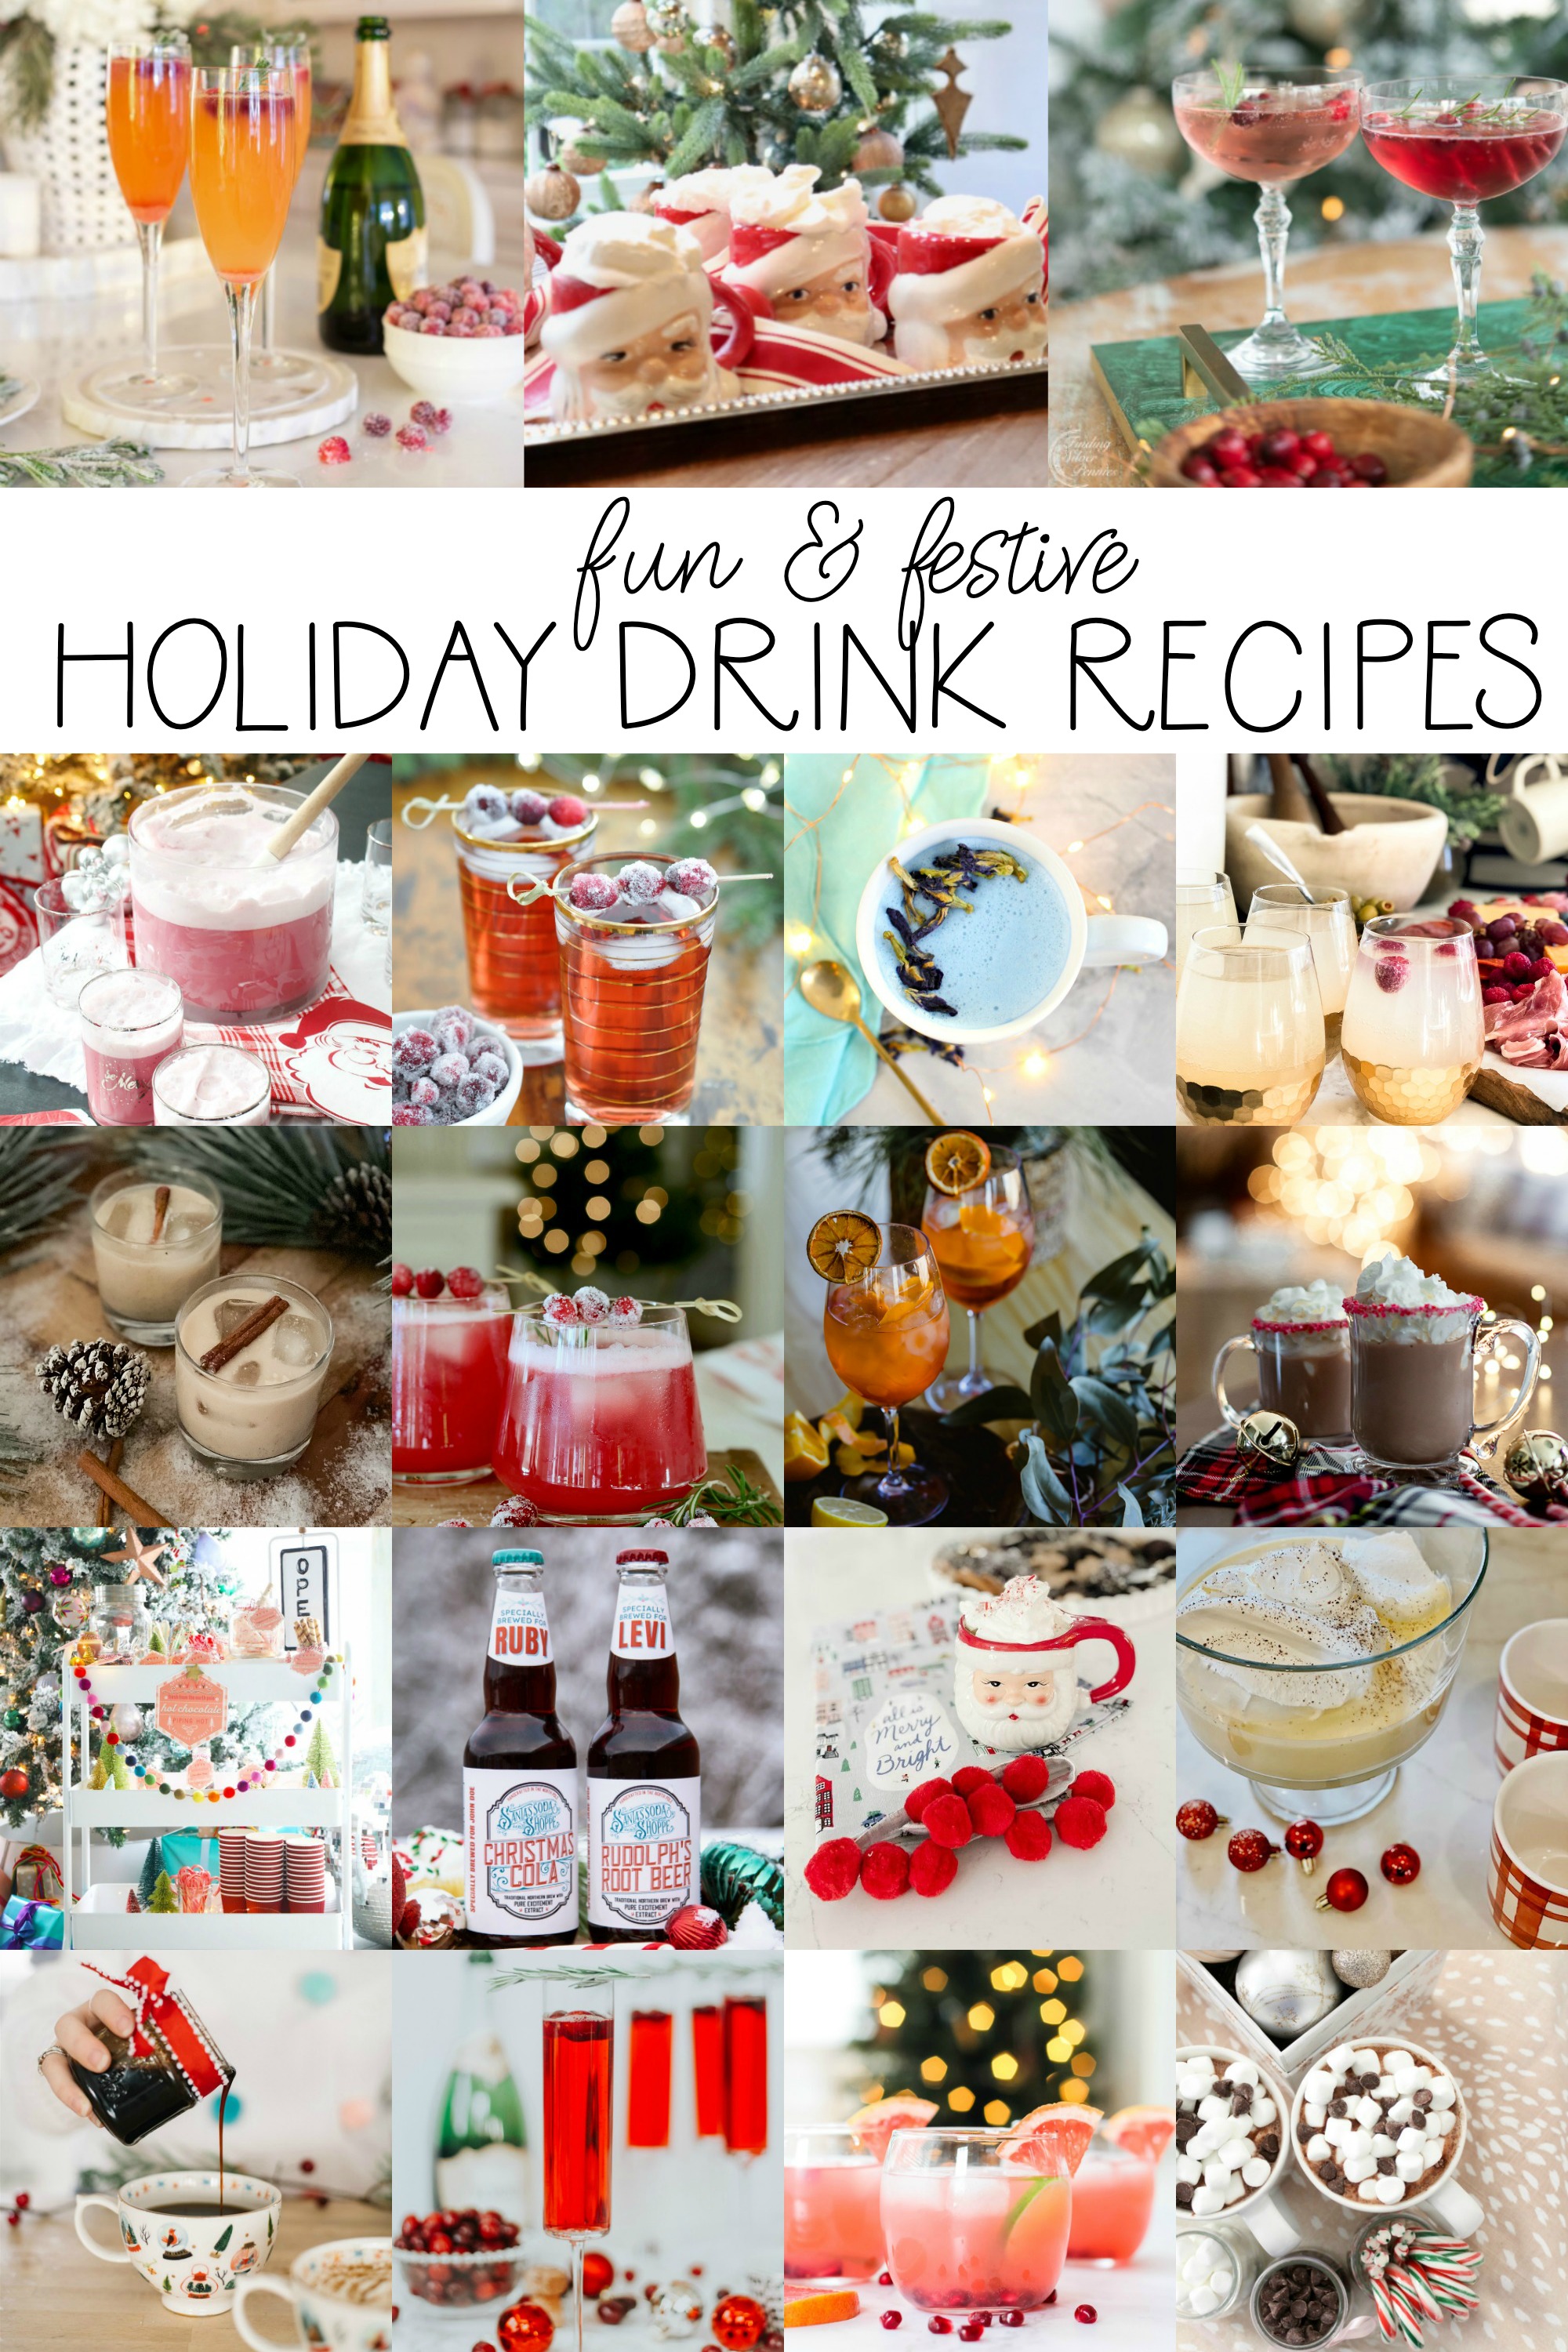 Fun & Festive Holiday Drink Recipes poster.